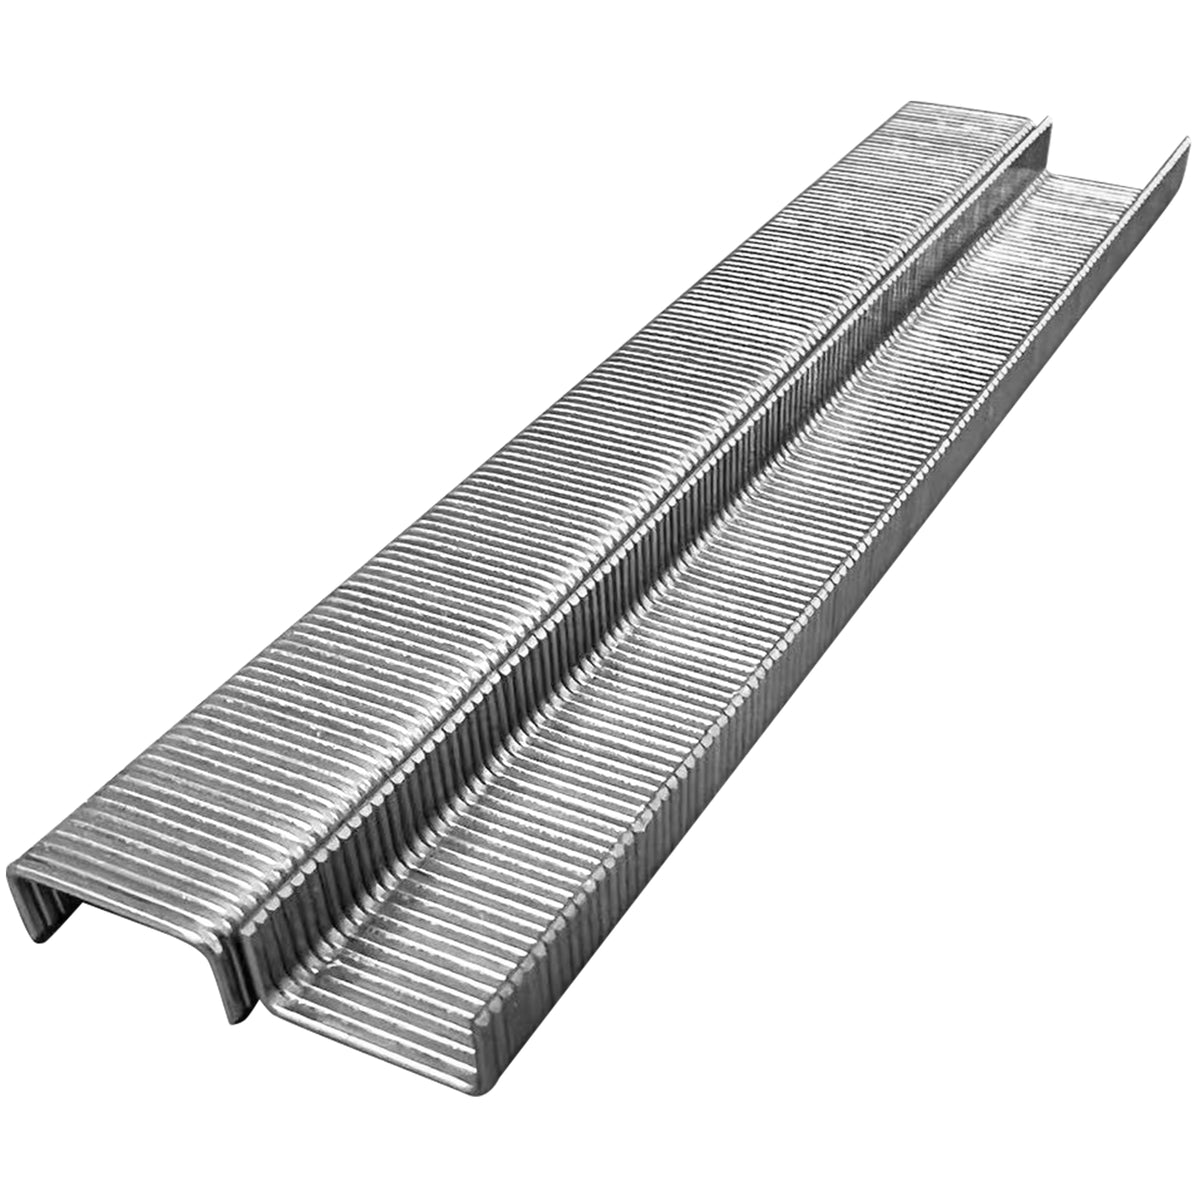 21 Gauge 80 Series 1/2" Crown 1/4" to 1/2" Leg Length 304 Stainless Steel Staples - MEITE USA